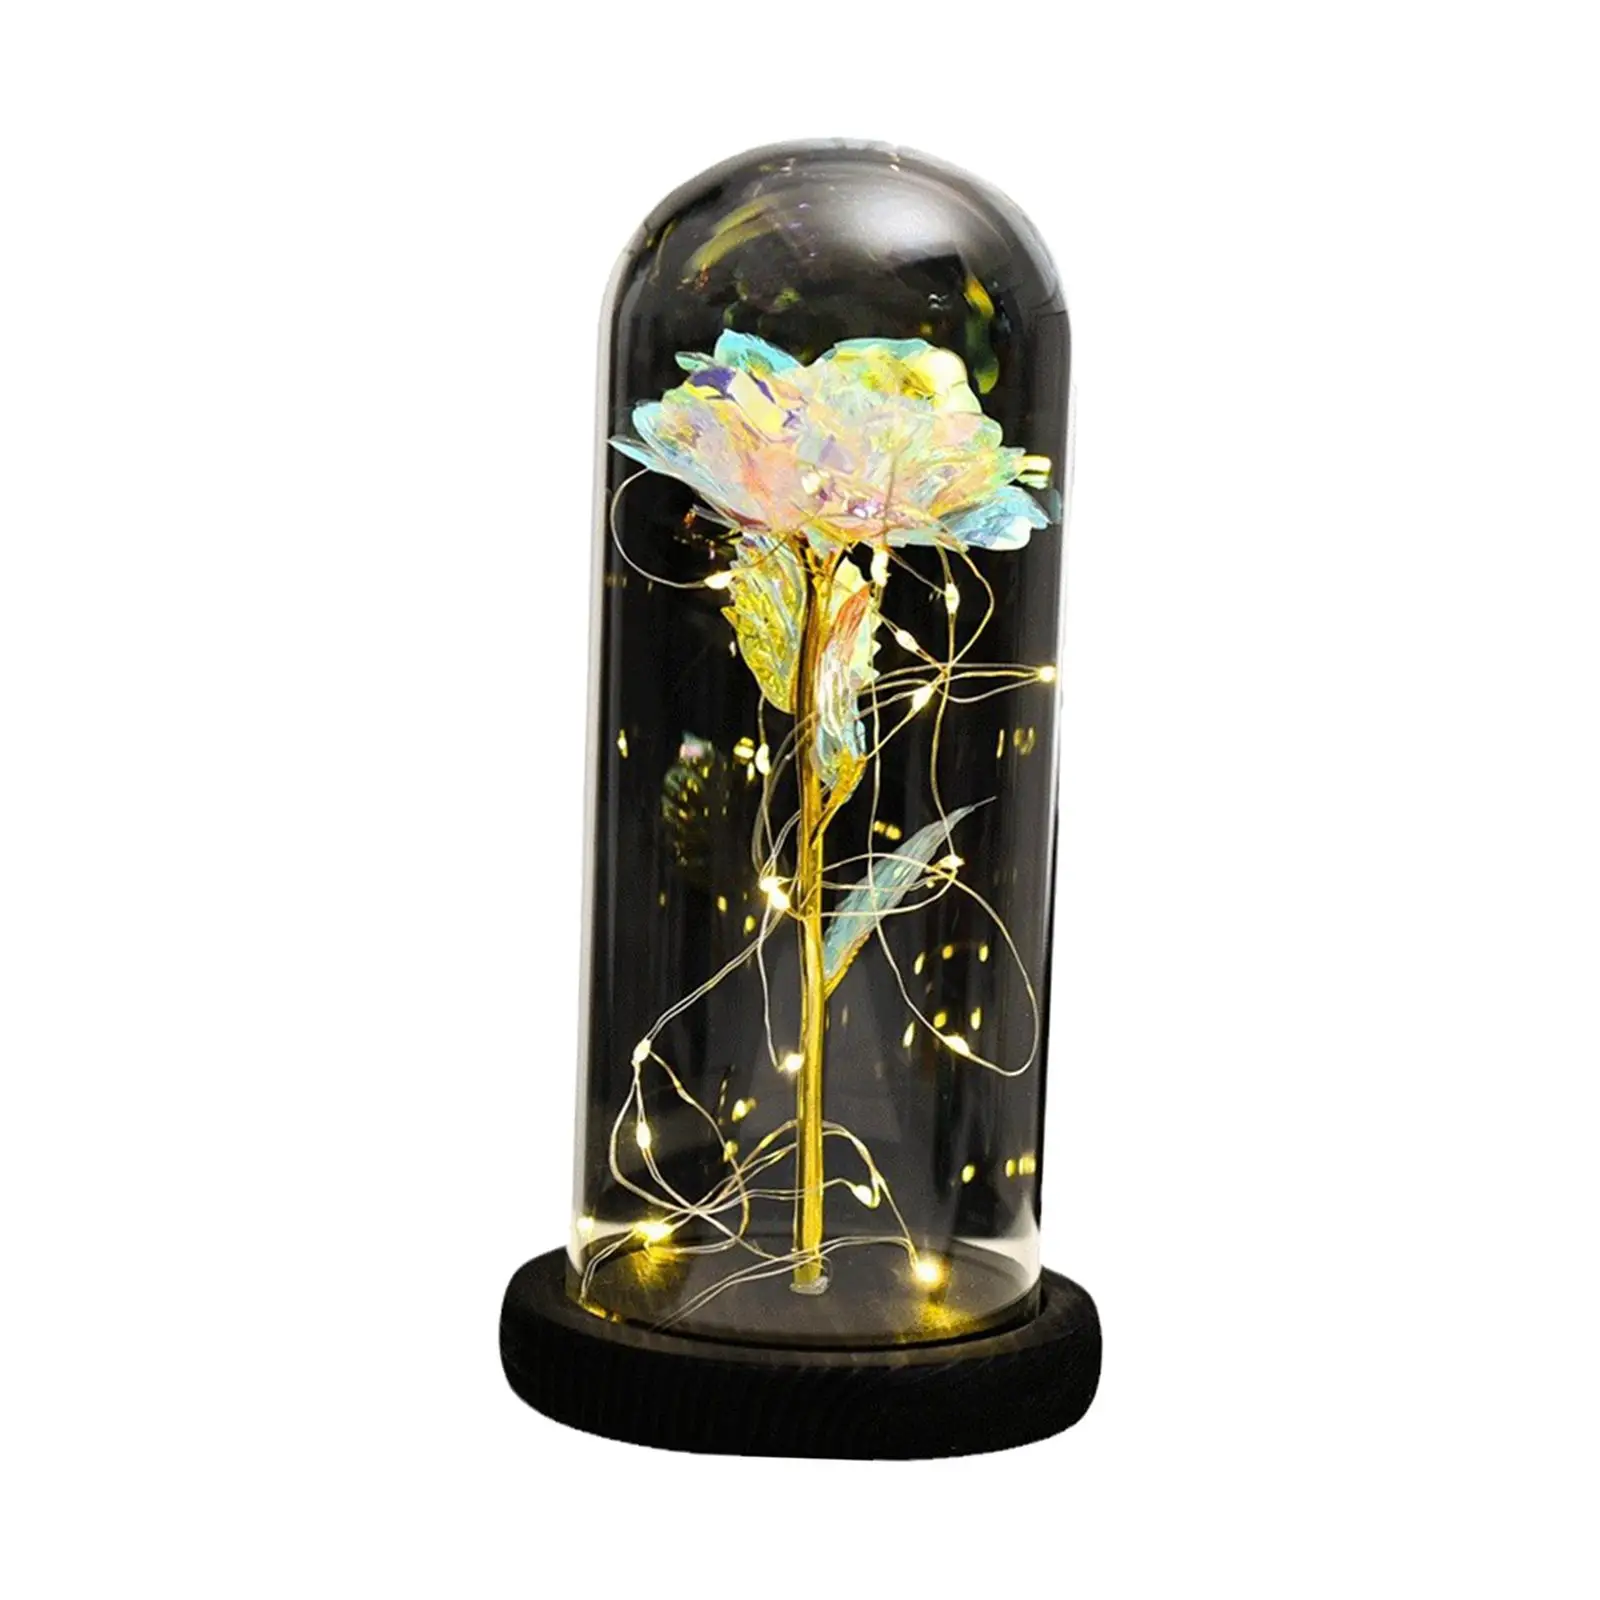 Night Light Eternal Flowers Ornament Lighting Ornaments Decorative Artificial Flower for Anniversary Holiday Wedding Party Decor